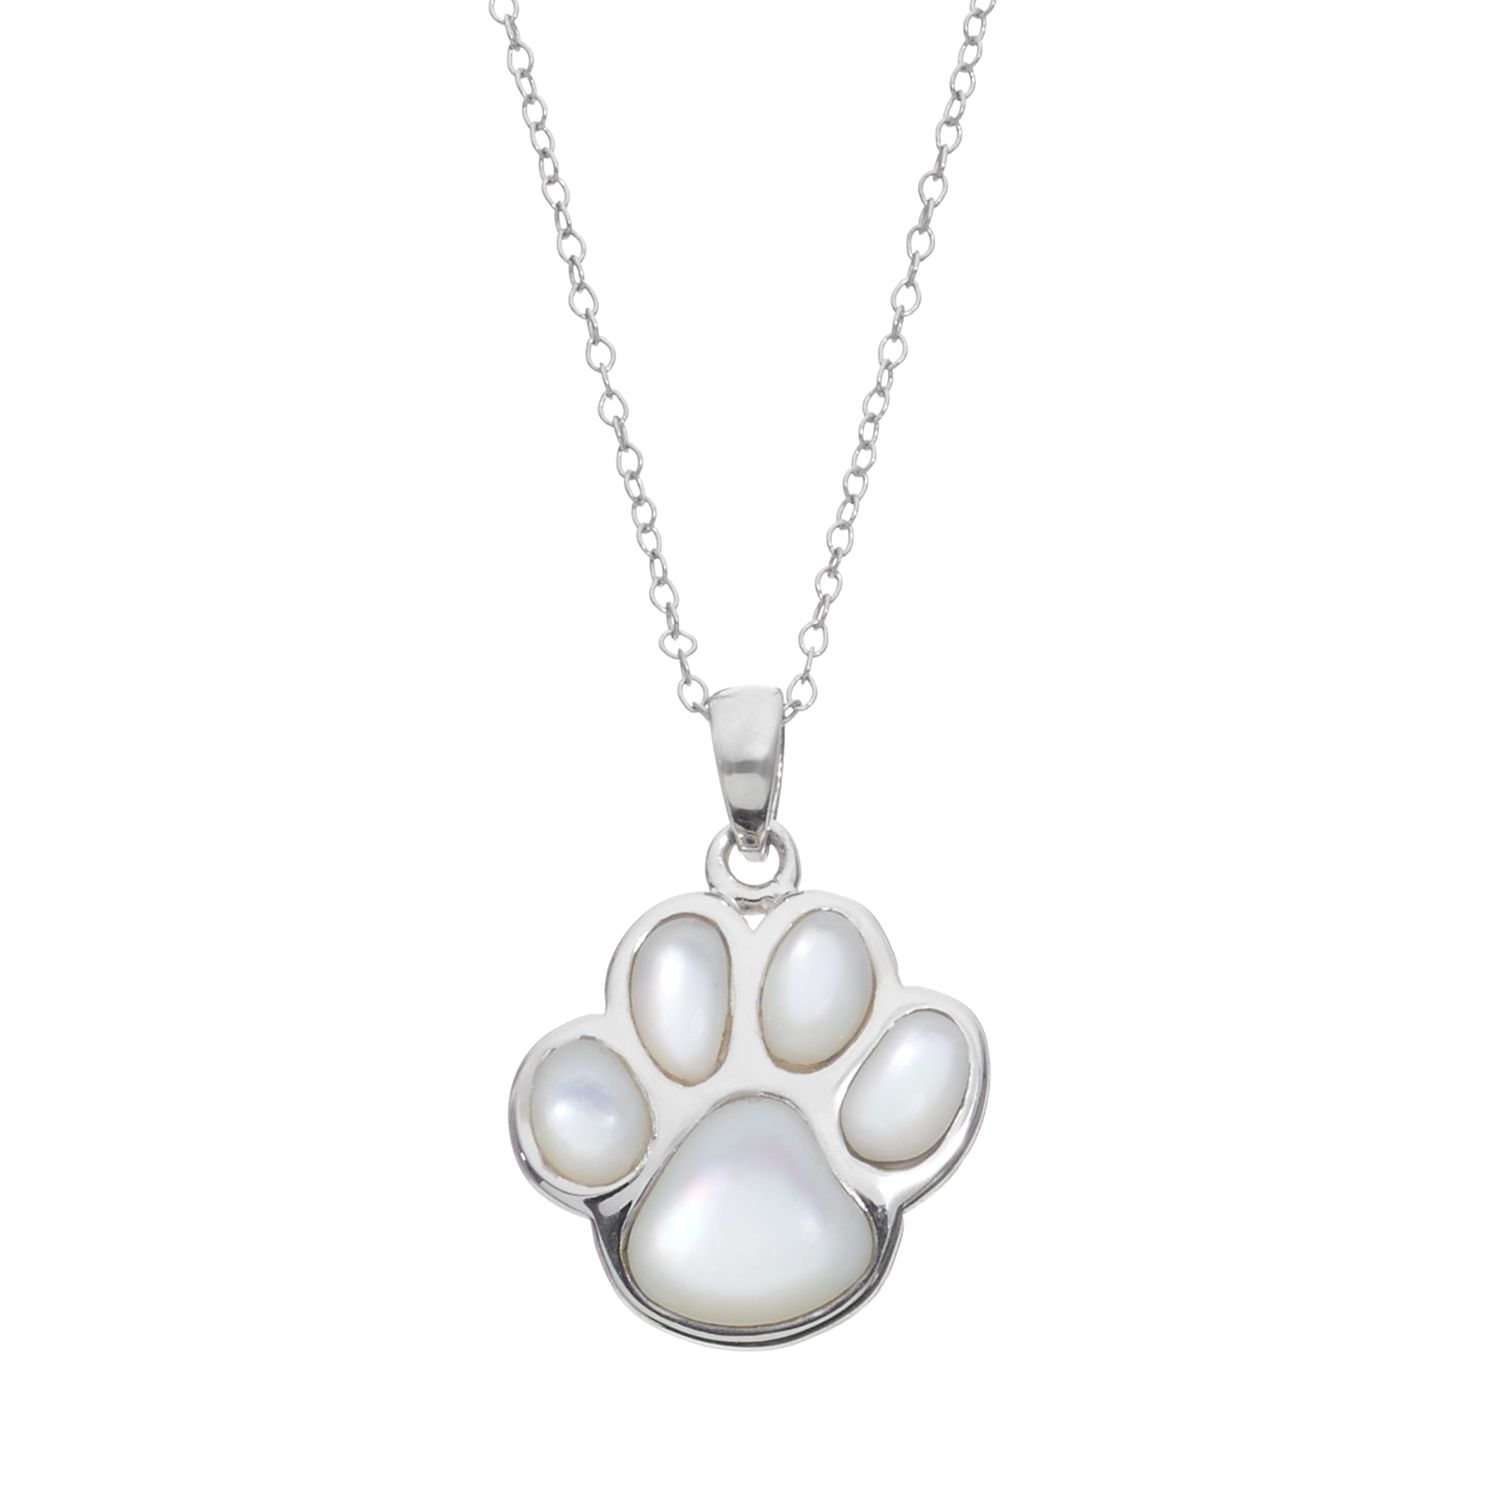 sterling silver dog paw charm